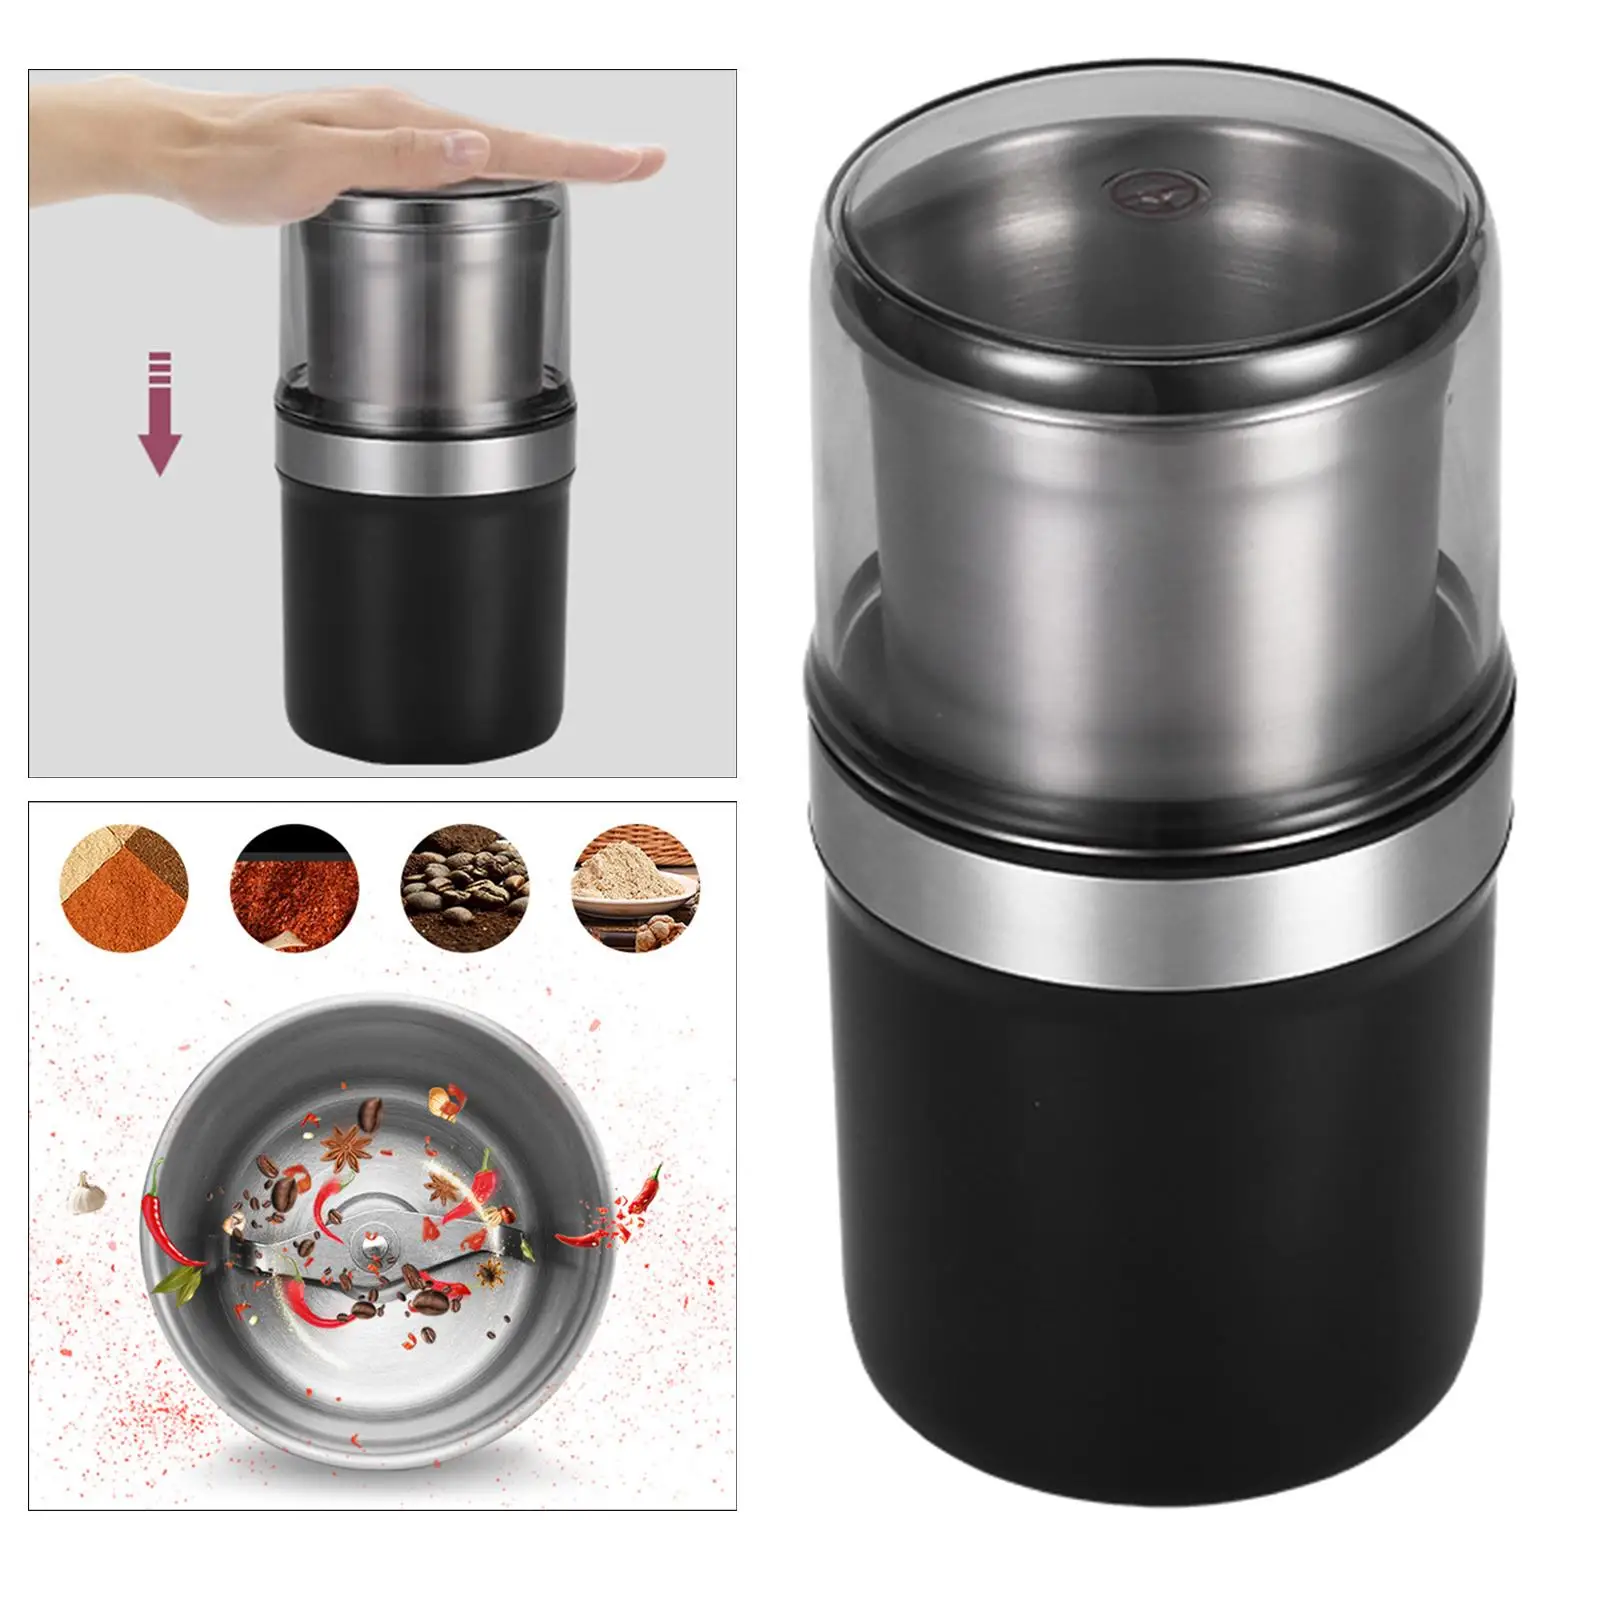 200W Electric Herbs/Spices/Nuts/Coffee Bean Grinder Grind Manual Machine